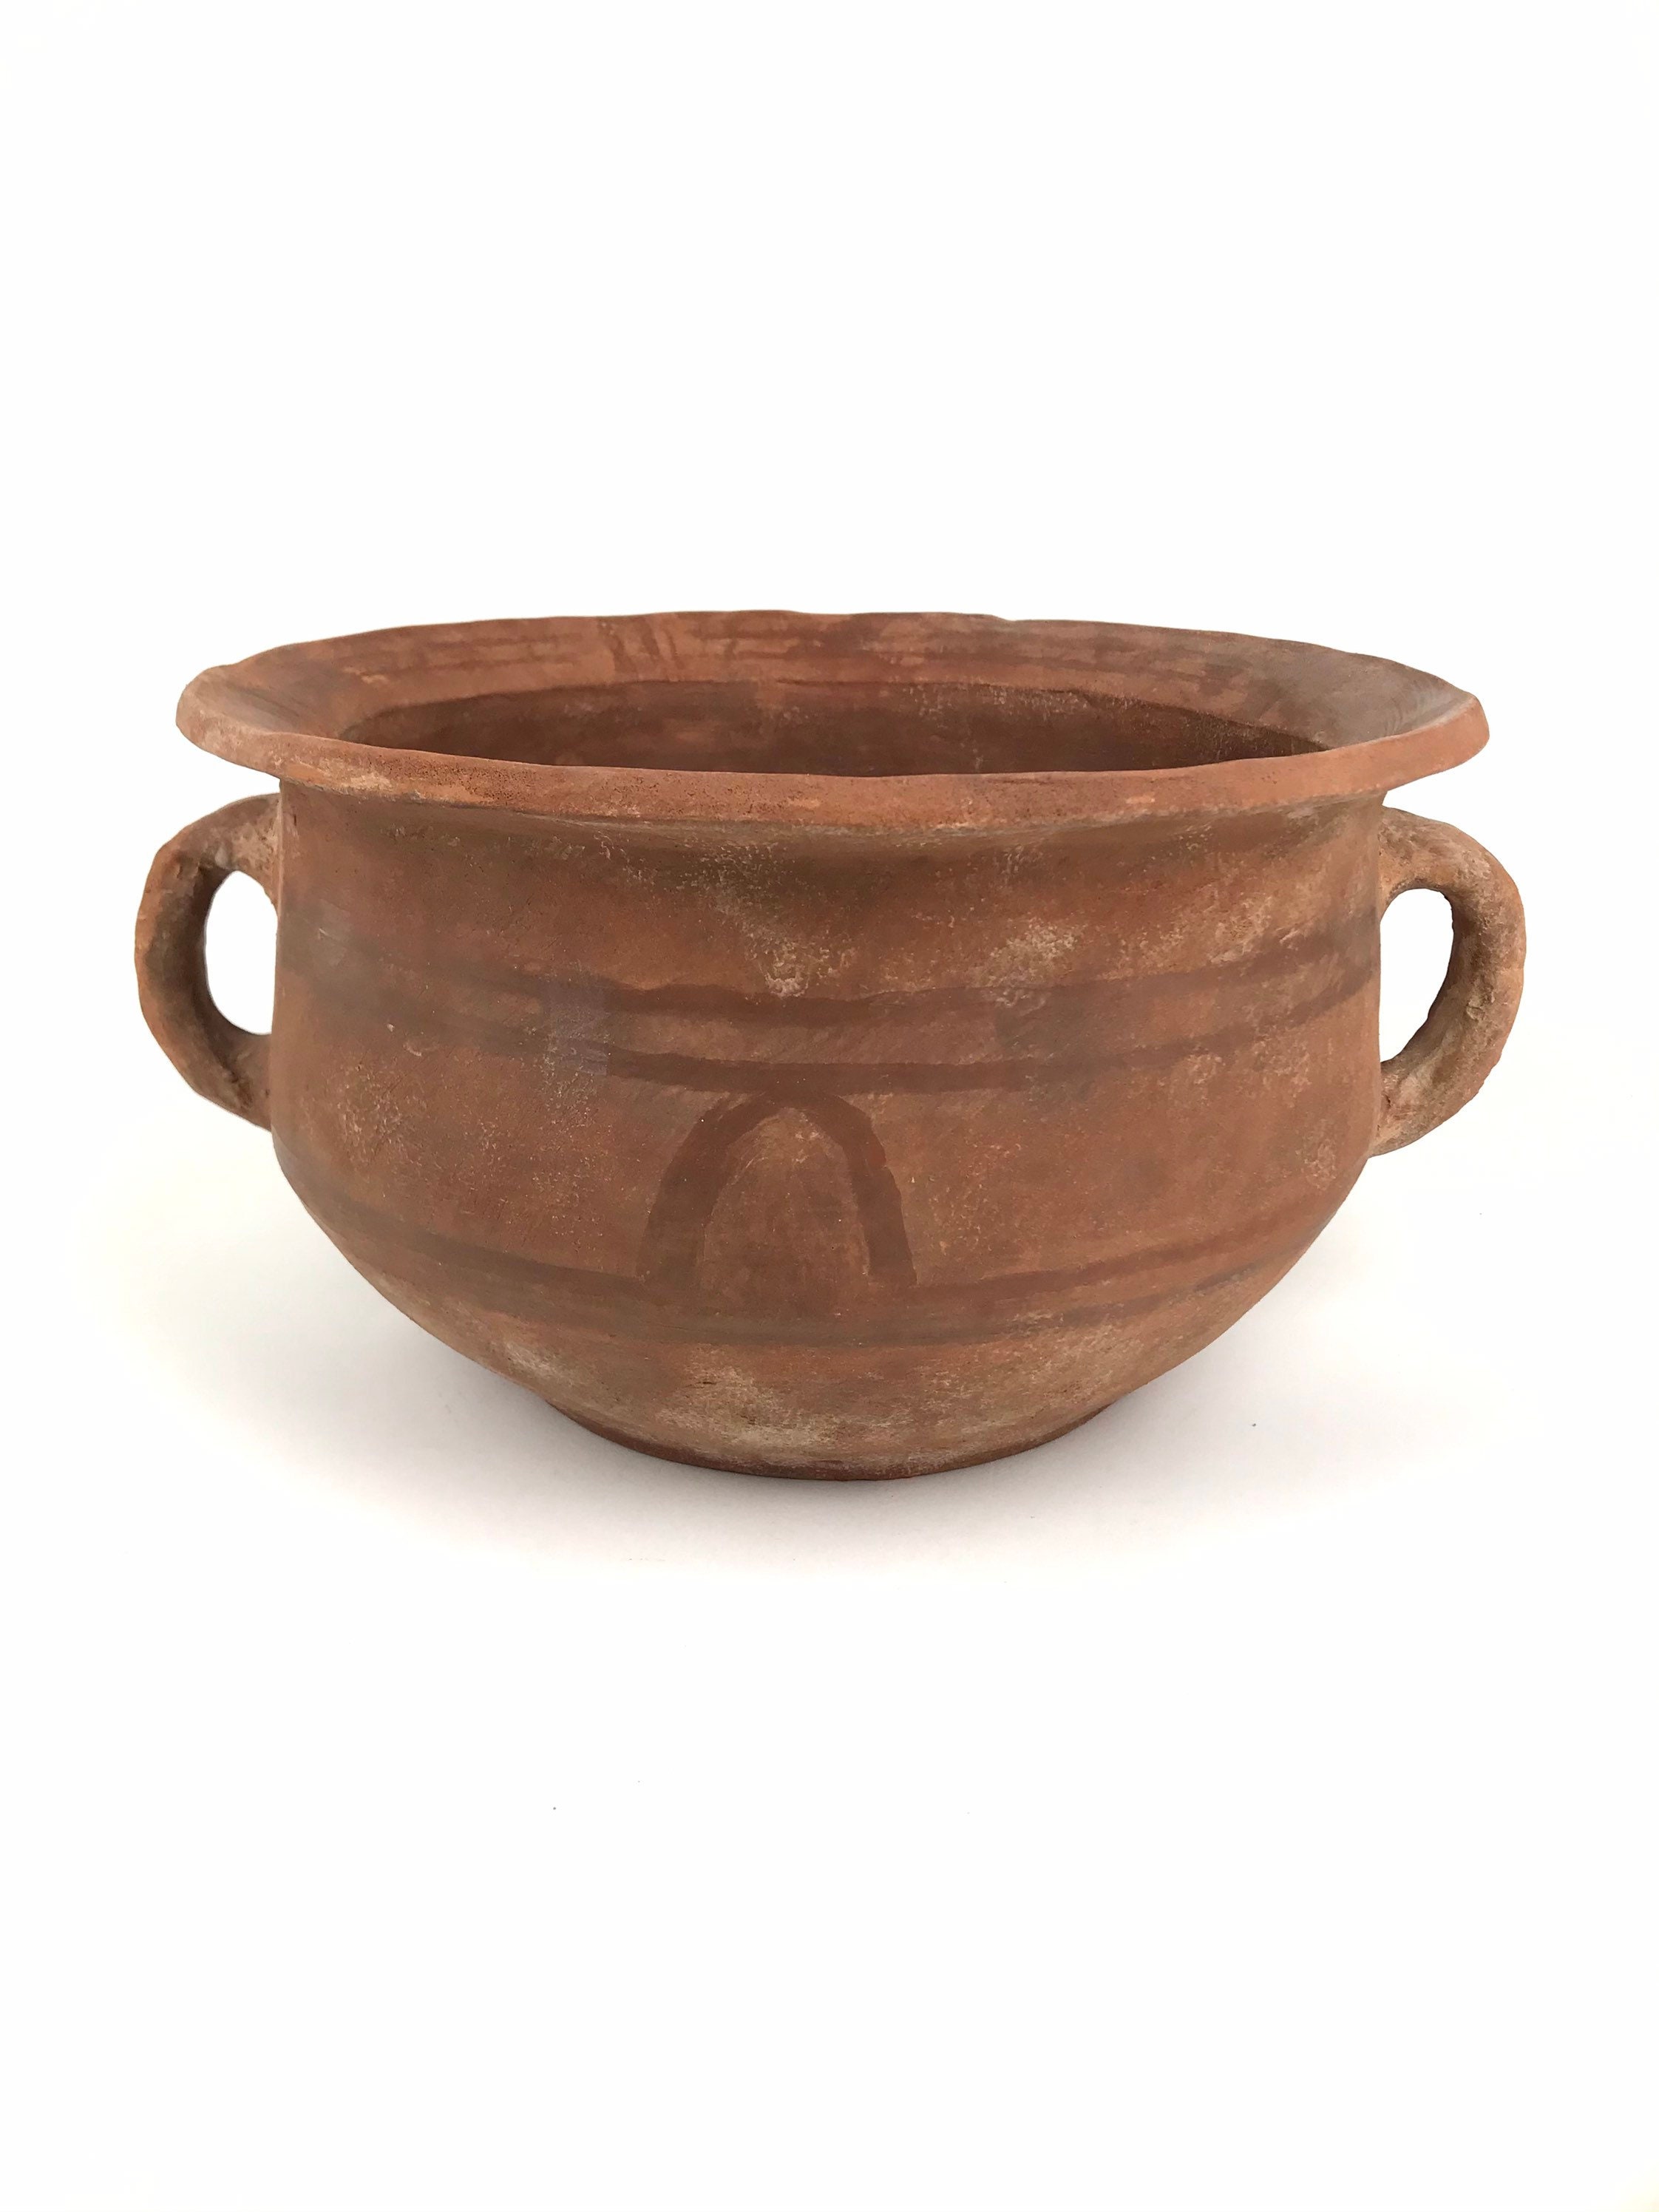 3 Piece Clay Pot Set - Earthen Red in Boulder, CO